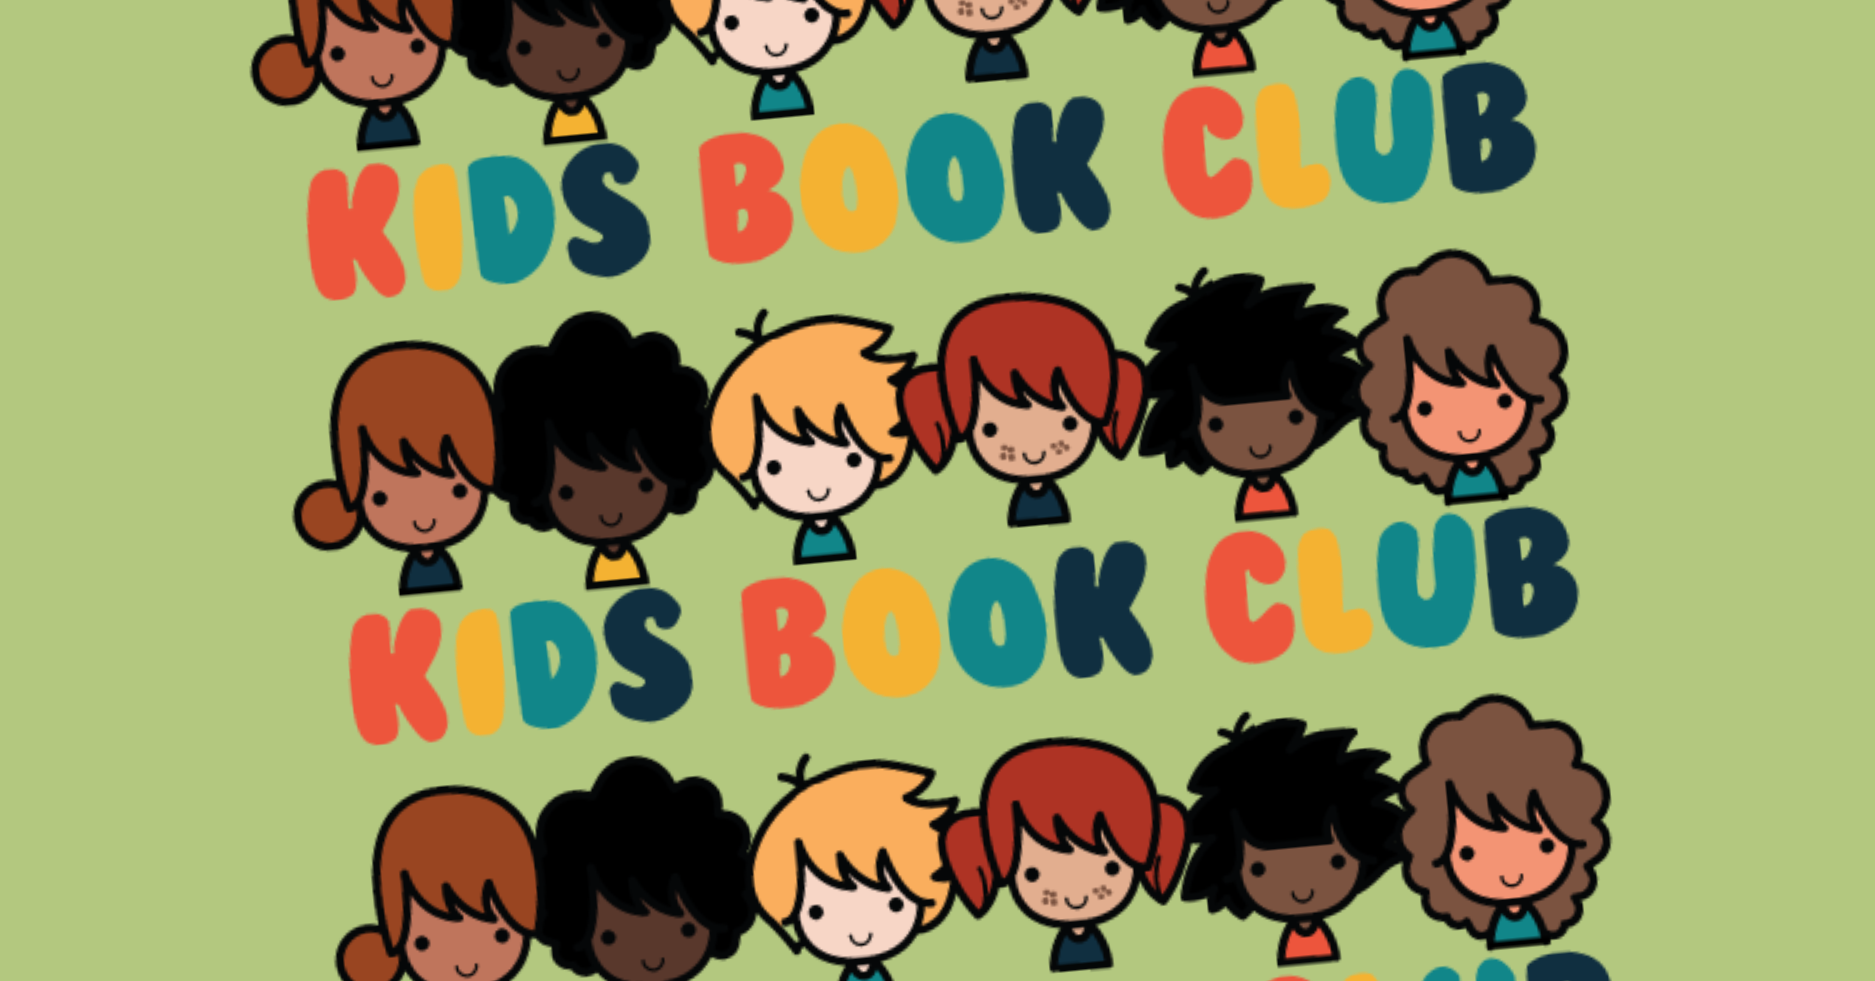 Illustration of children and text that says Kids Book Club